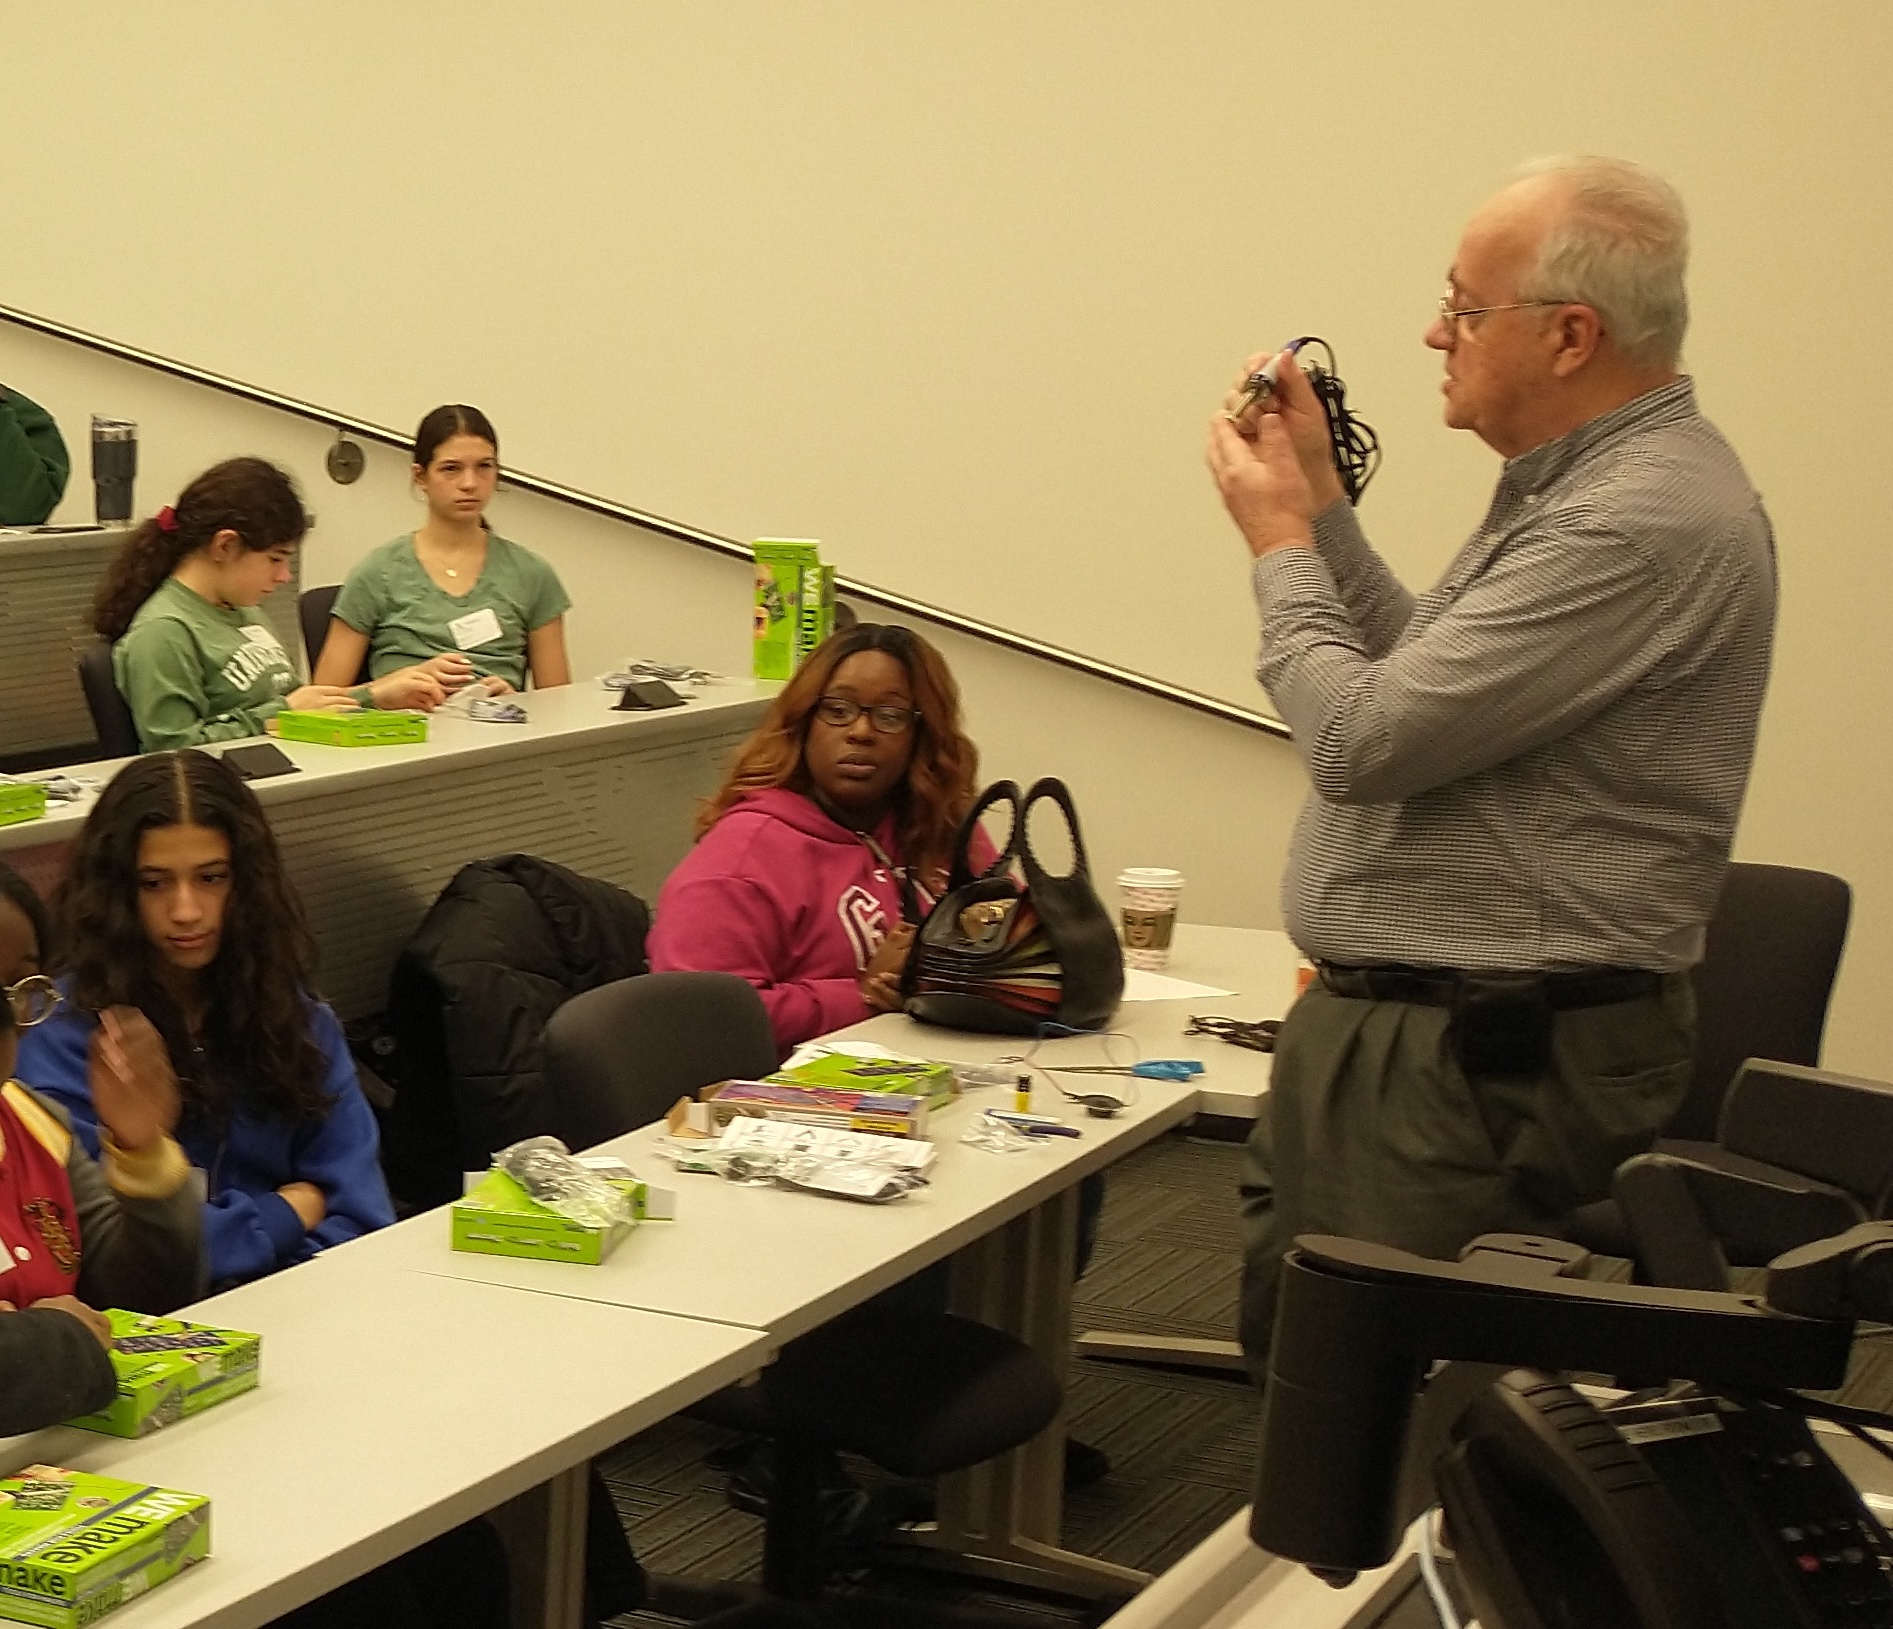 Steve Peters, SMIEEE, Northwest Subsection Chair, demonstrates to the students how to use a soldering iron.